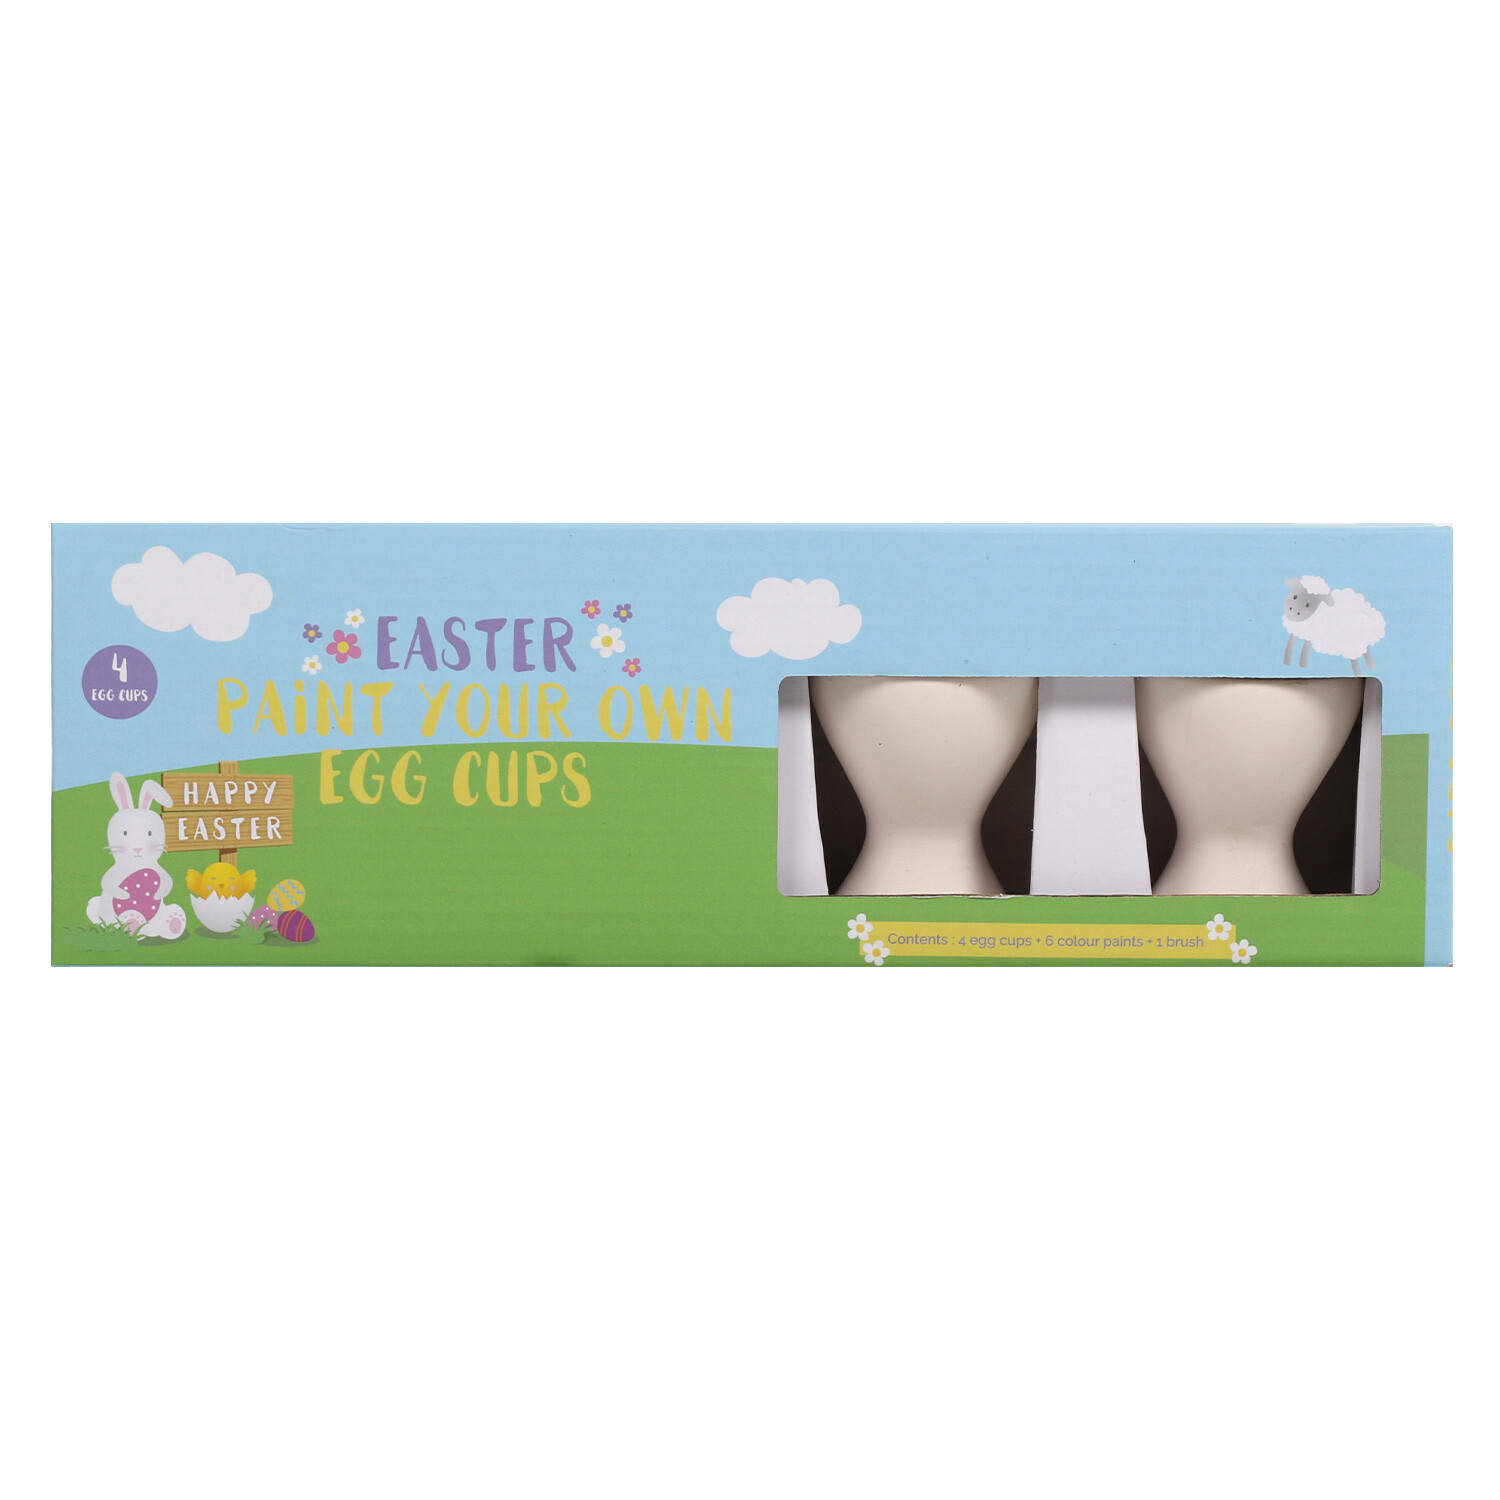 Easter Paint Your Own Egg Cups Kit 4 Pack Image